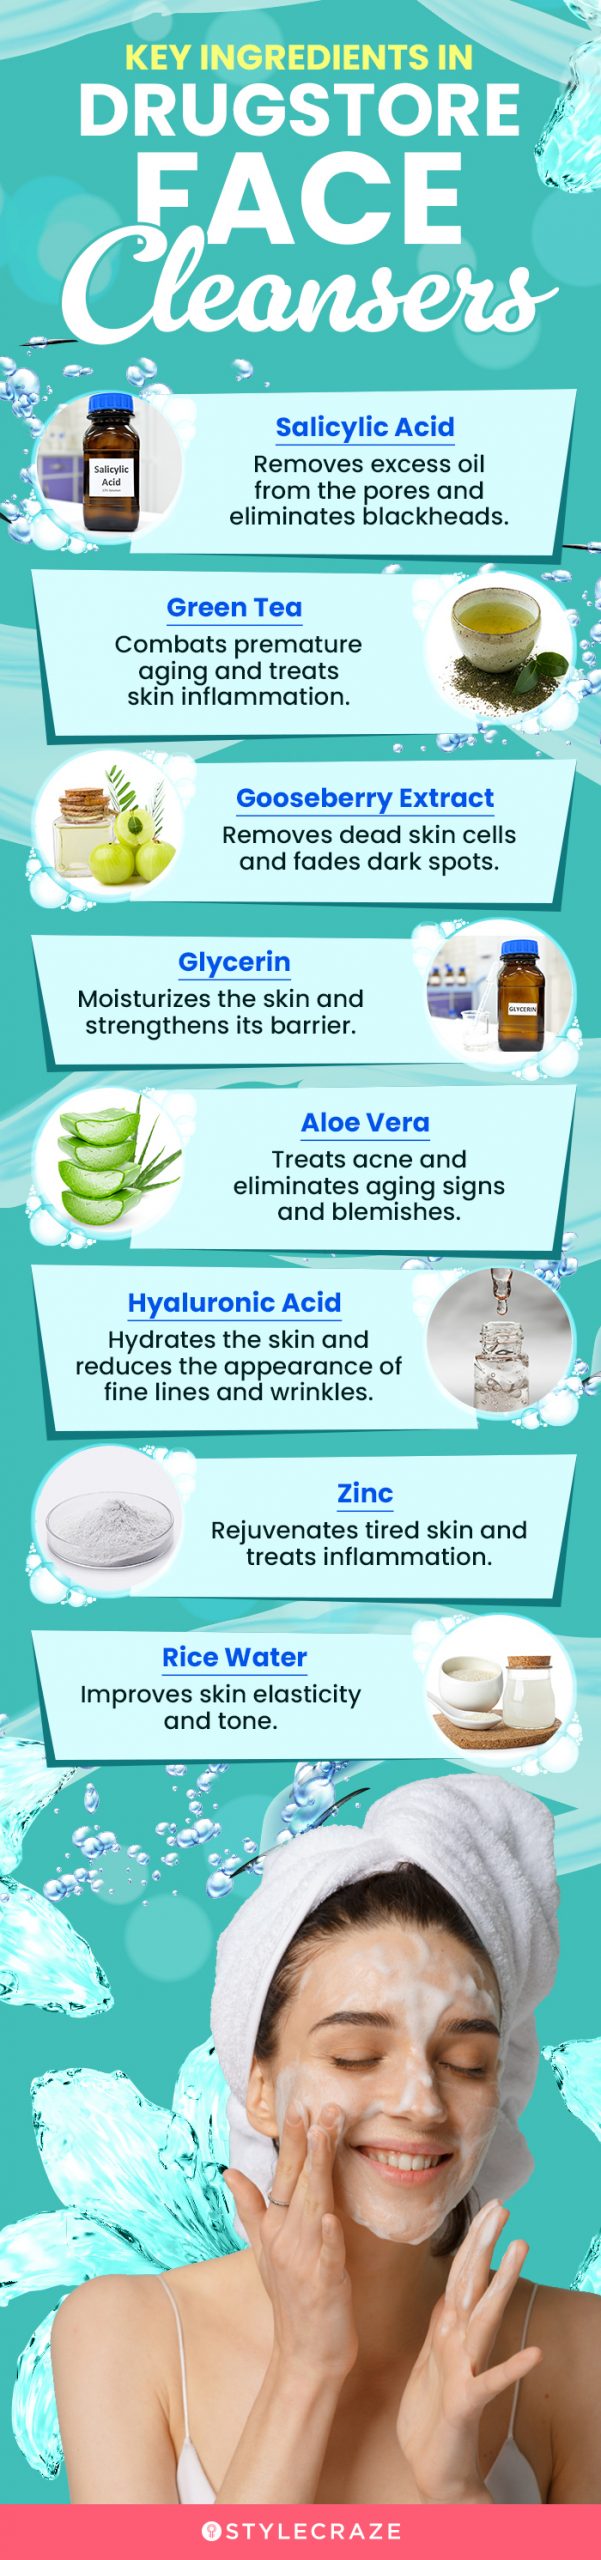 Key Ingredients In Drugstore Face Cleansers (infographic)